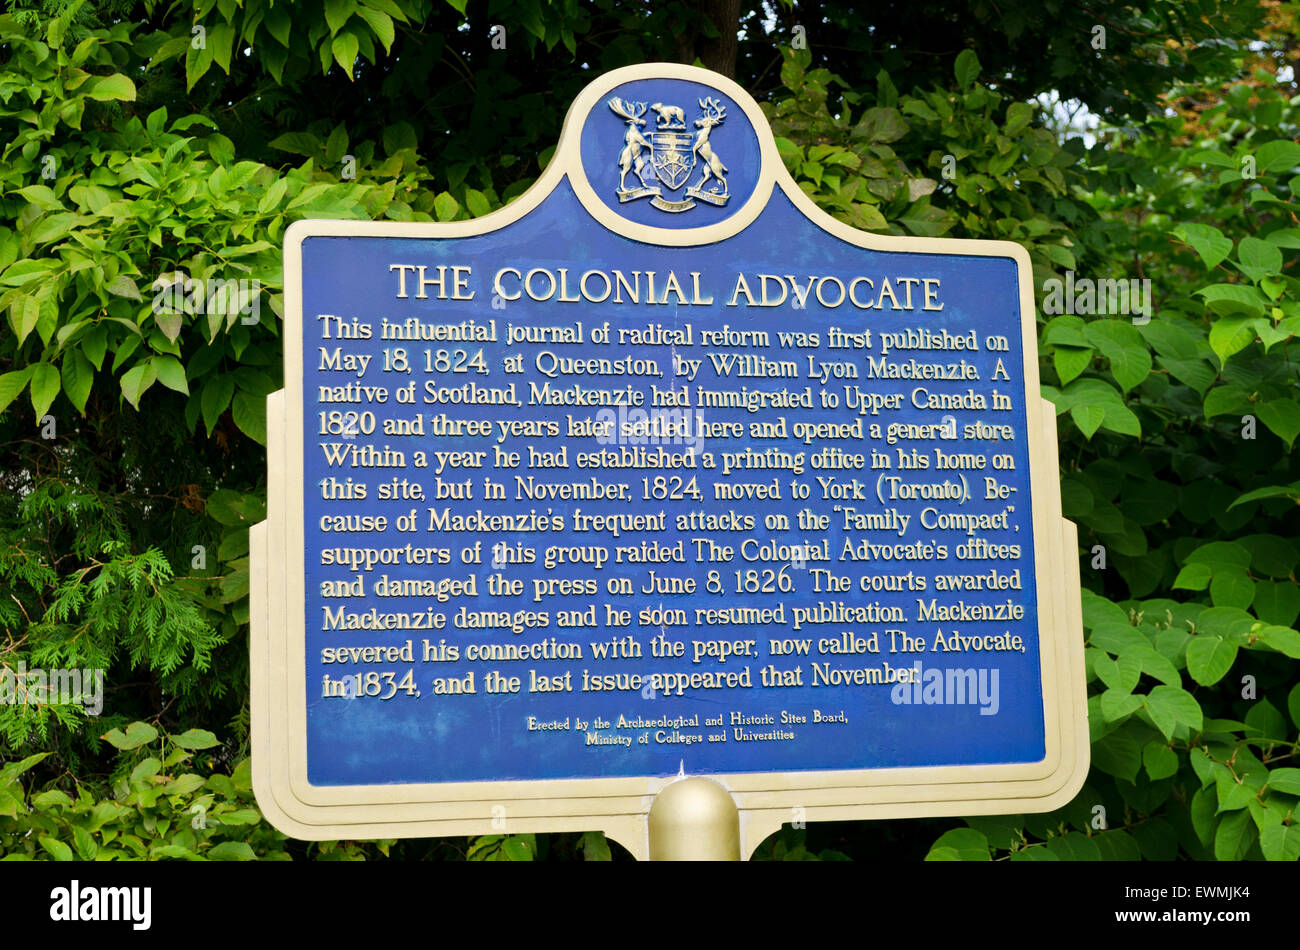 Interpretive sign for 'The Colonial Advocate', a radical journal published by William Lyon Mackenzie in the 1800s Upper Canada. Stock Photo